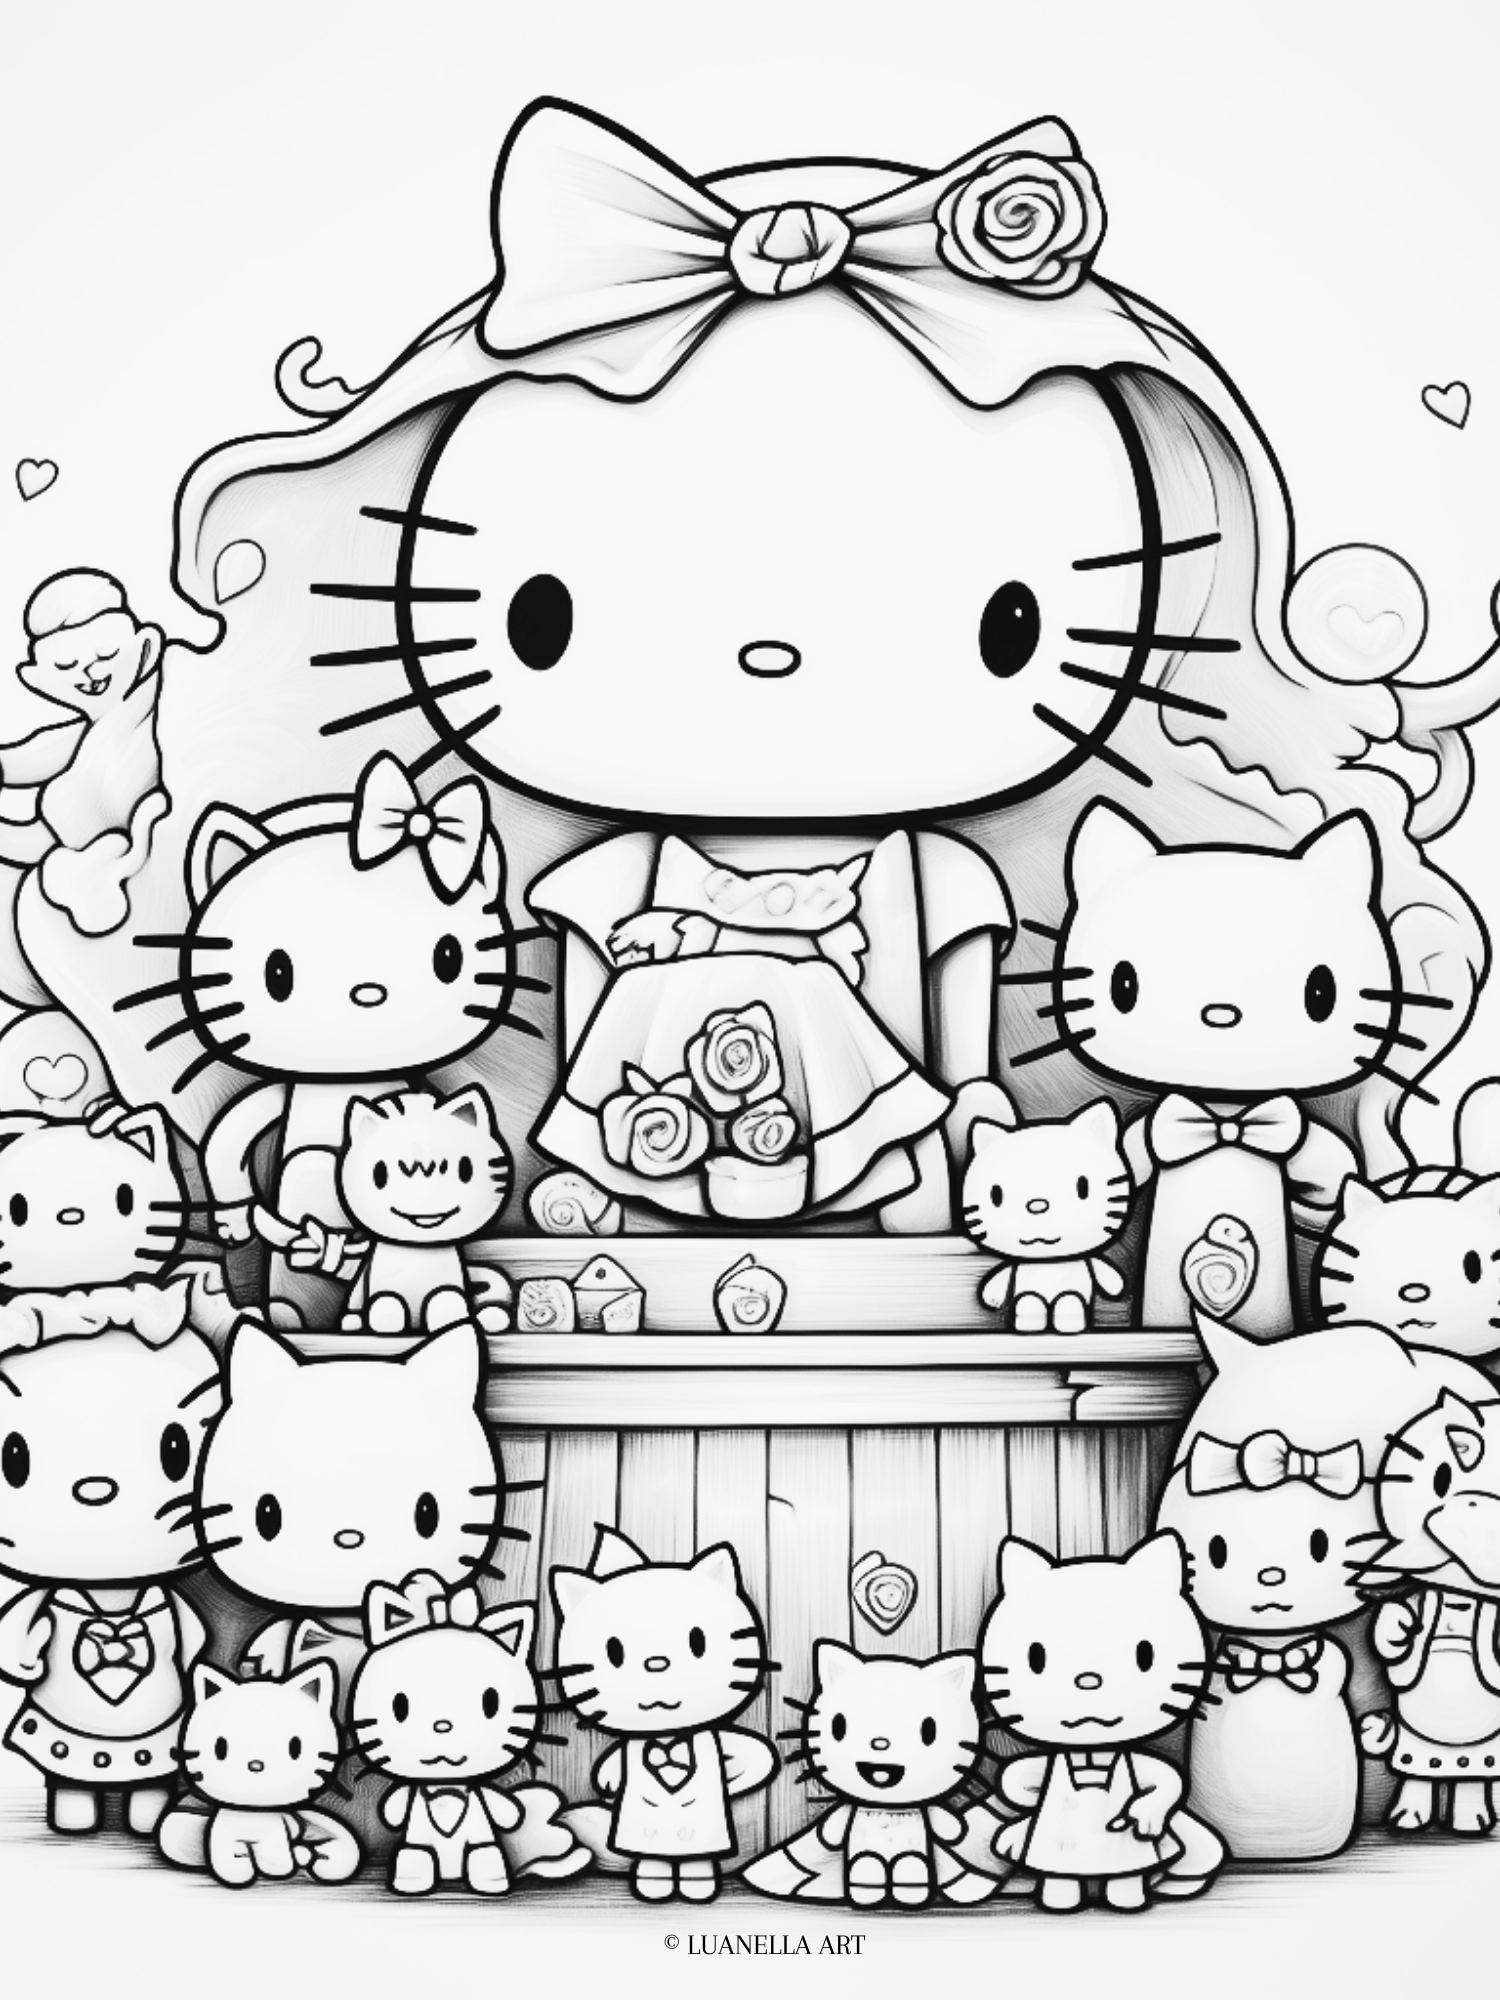 Sanrio hello kitty characters coloring page instant digital downl â luanella art